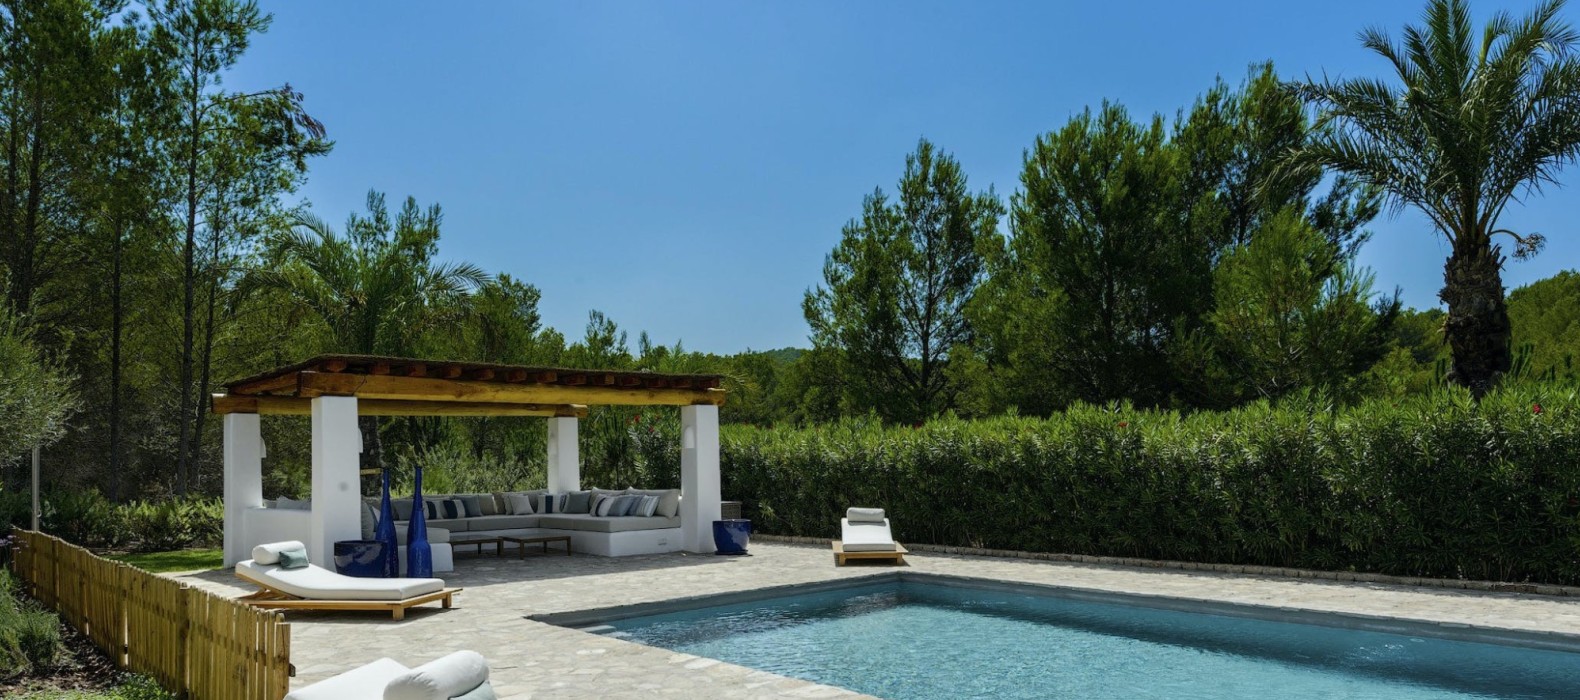 Exterior pool and chill area of Villa Blissful Life in Ibiza